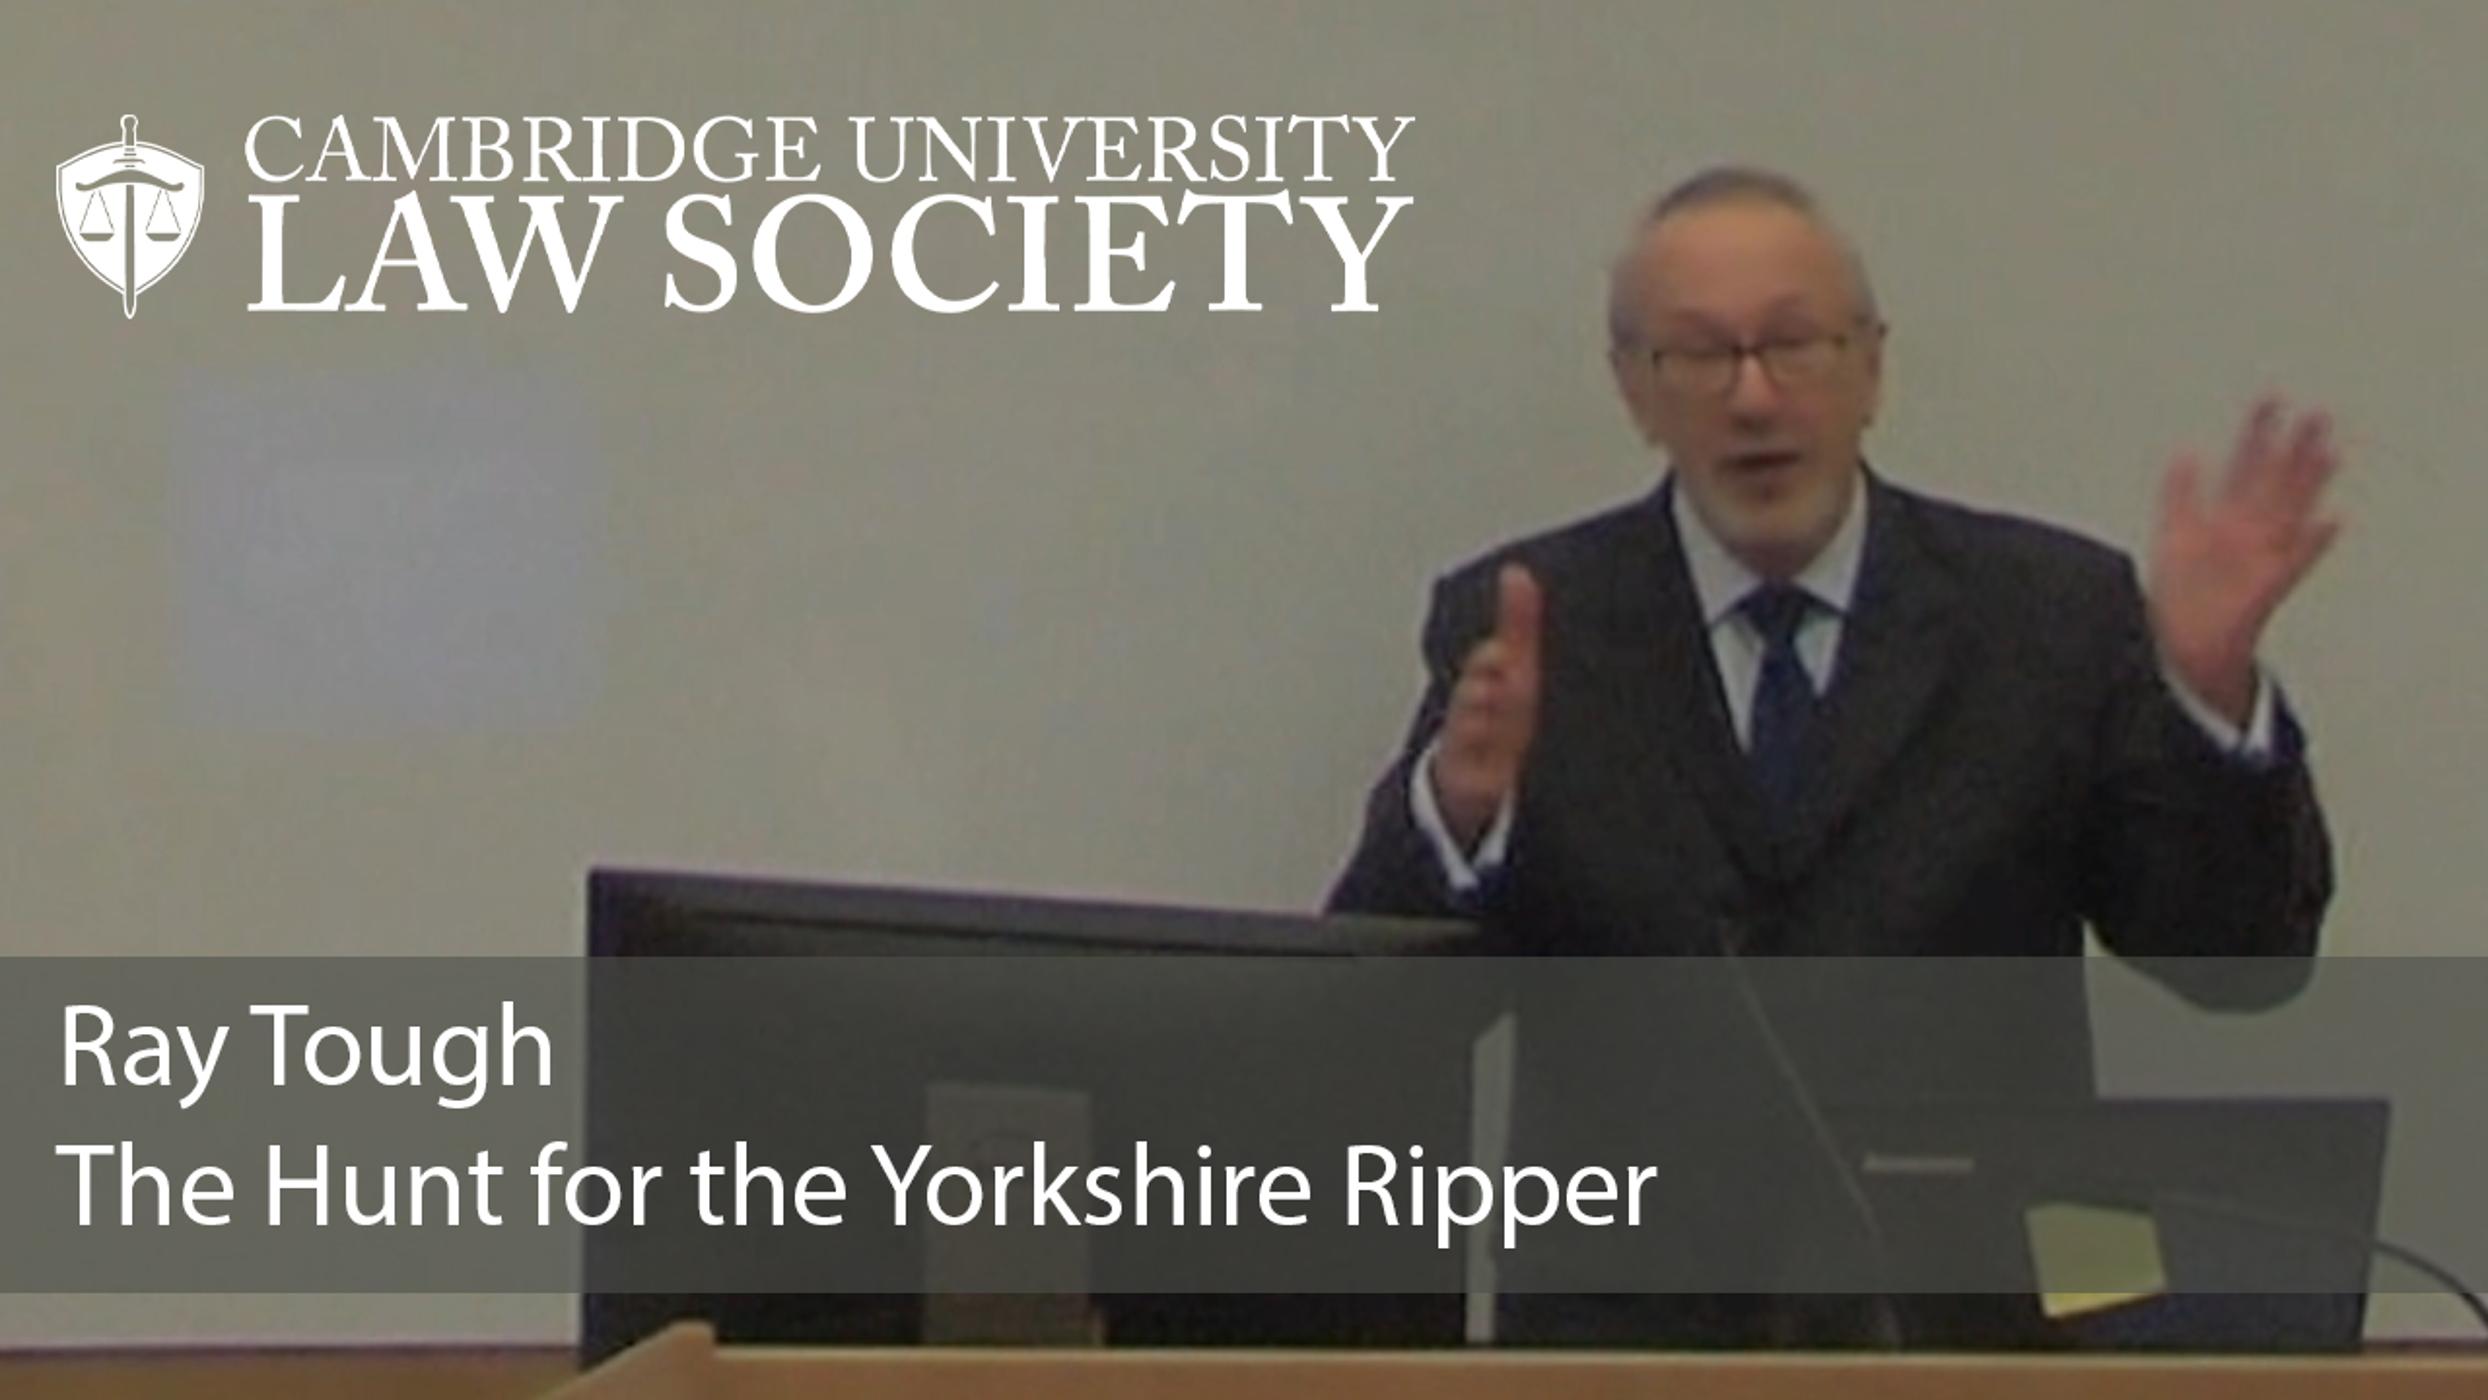 'The Hunt for the Yorkshire Ripper' - Ray Tough: CULS Lecture (audio)